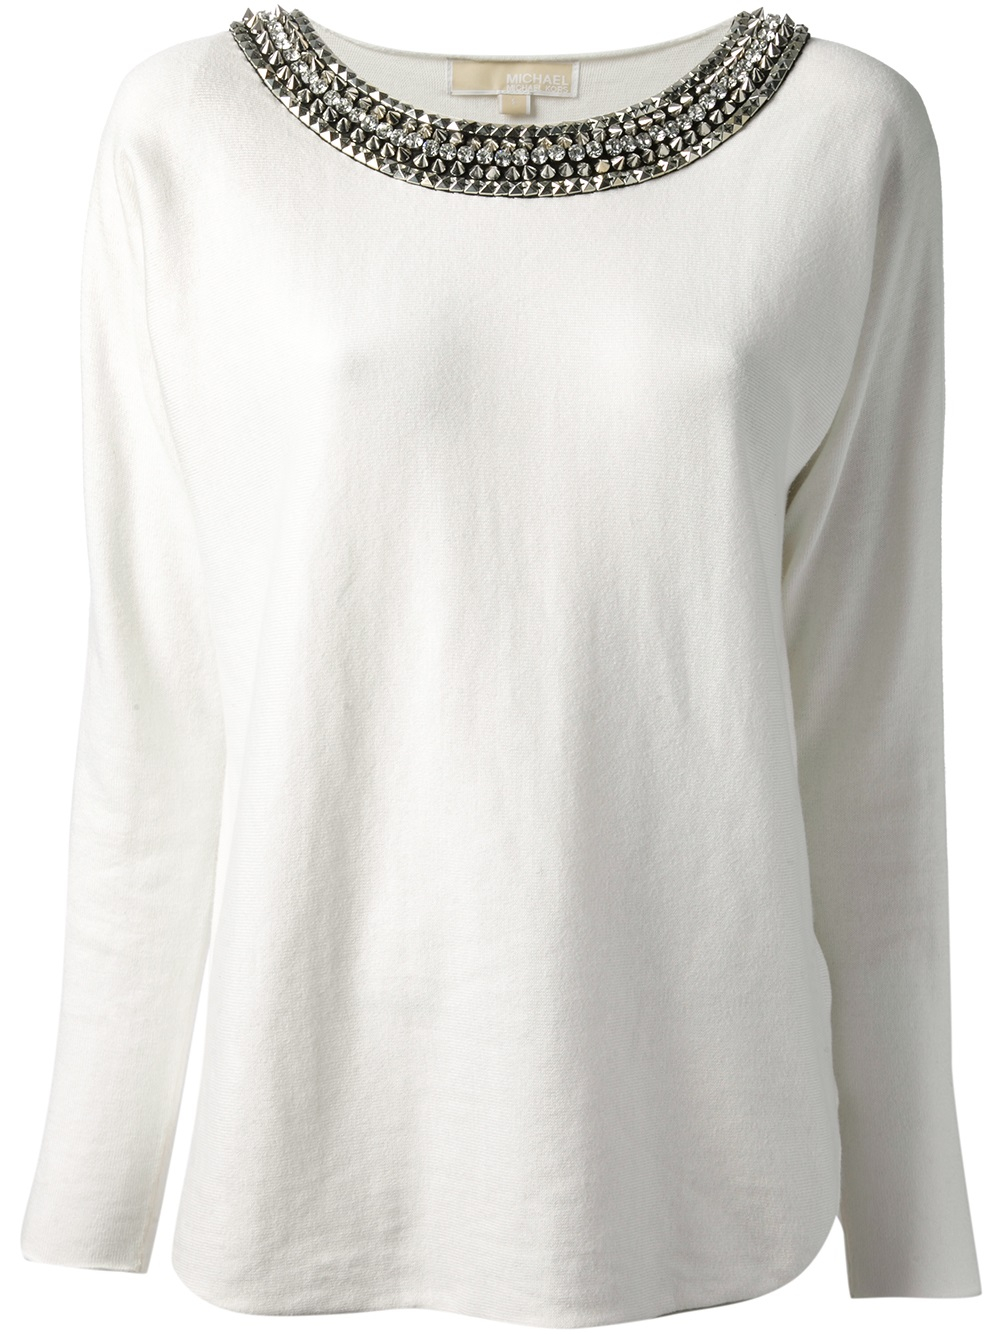 MICHAEL Michael Kors Embellished Collar Sweater in White - Lyst